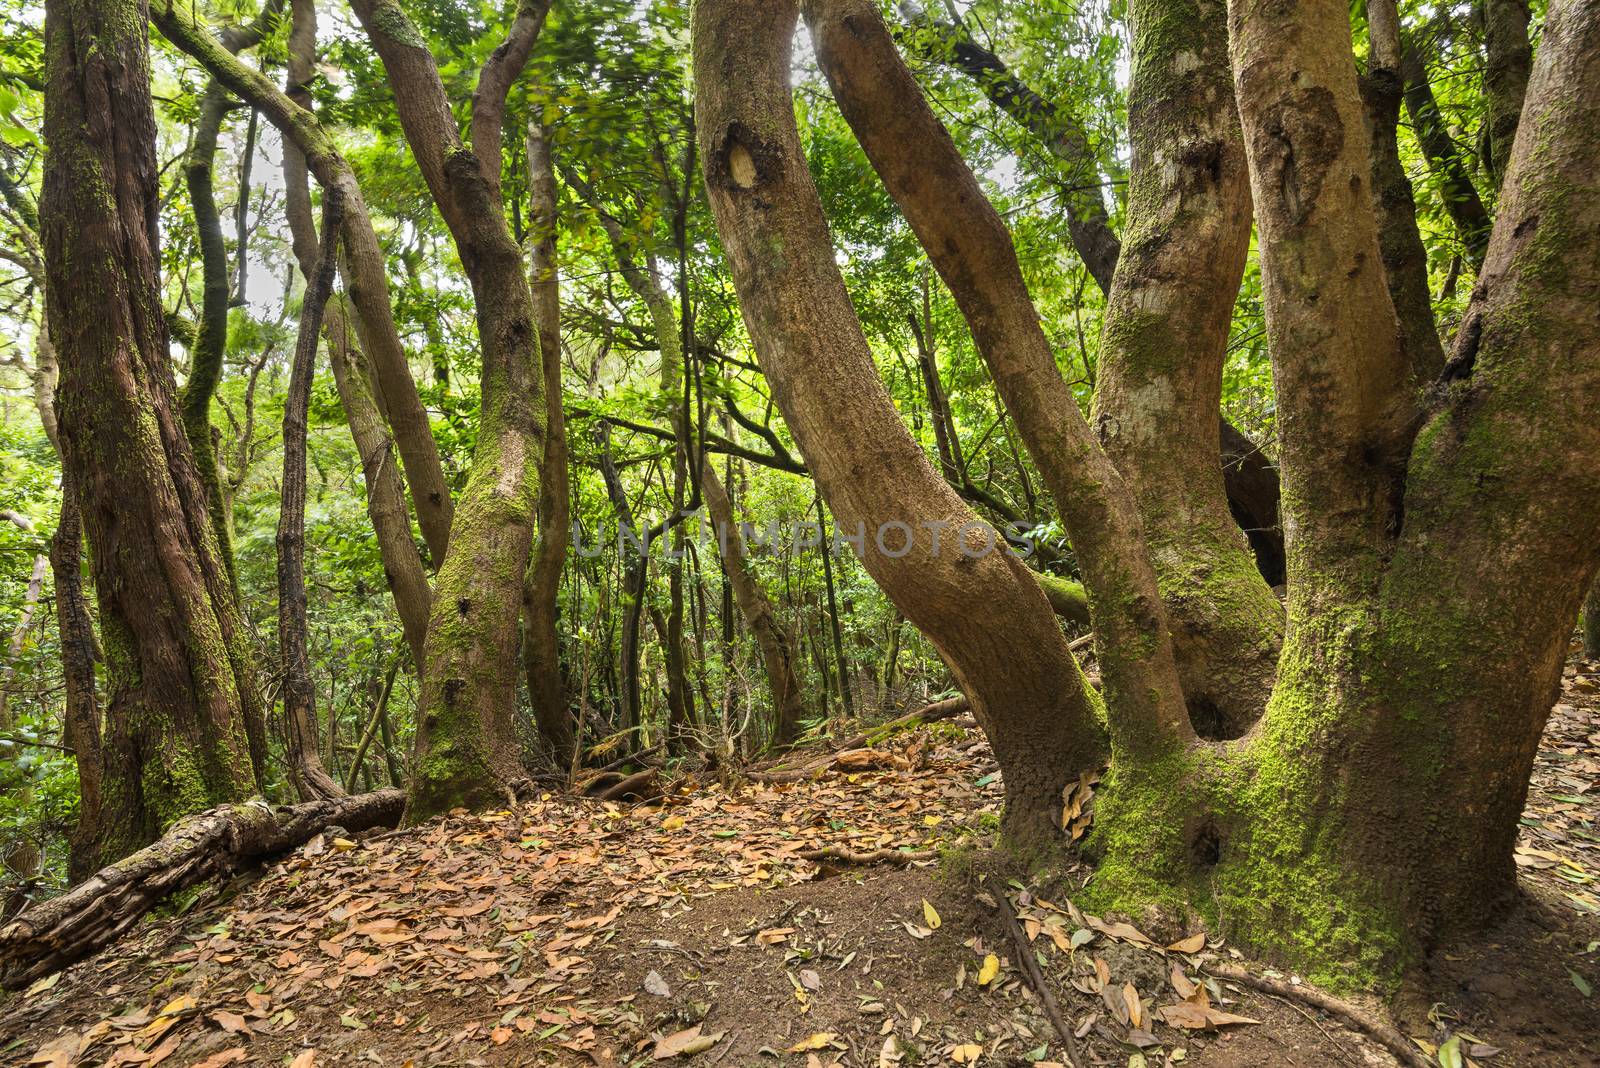 Tropical forest in Anaga, Tenerife, Canary island, Spain.